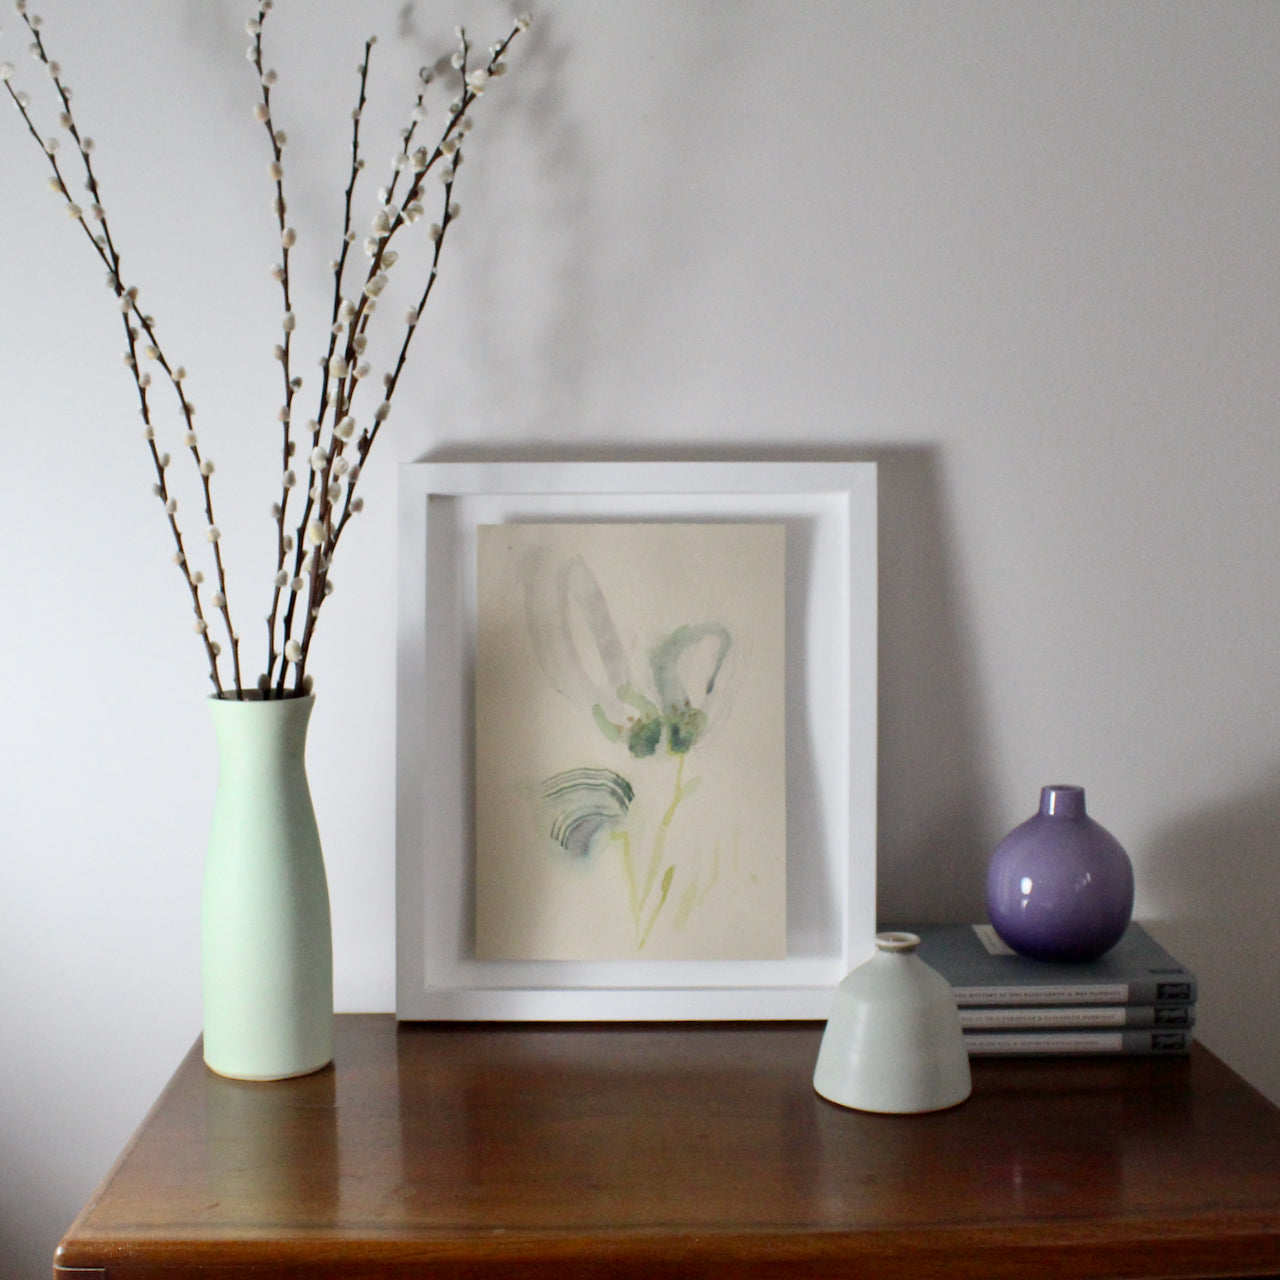 framed watercolour of a flower head and stem by Tara Leaver next to a tall pale green vase with stems in it and a small purple glass pot